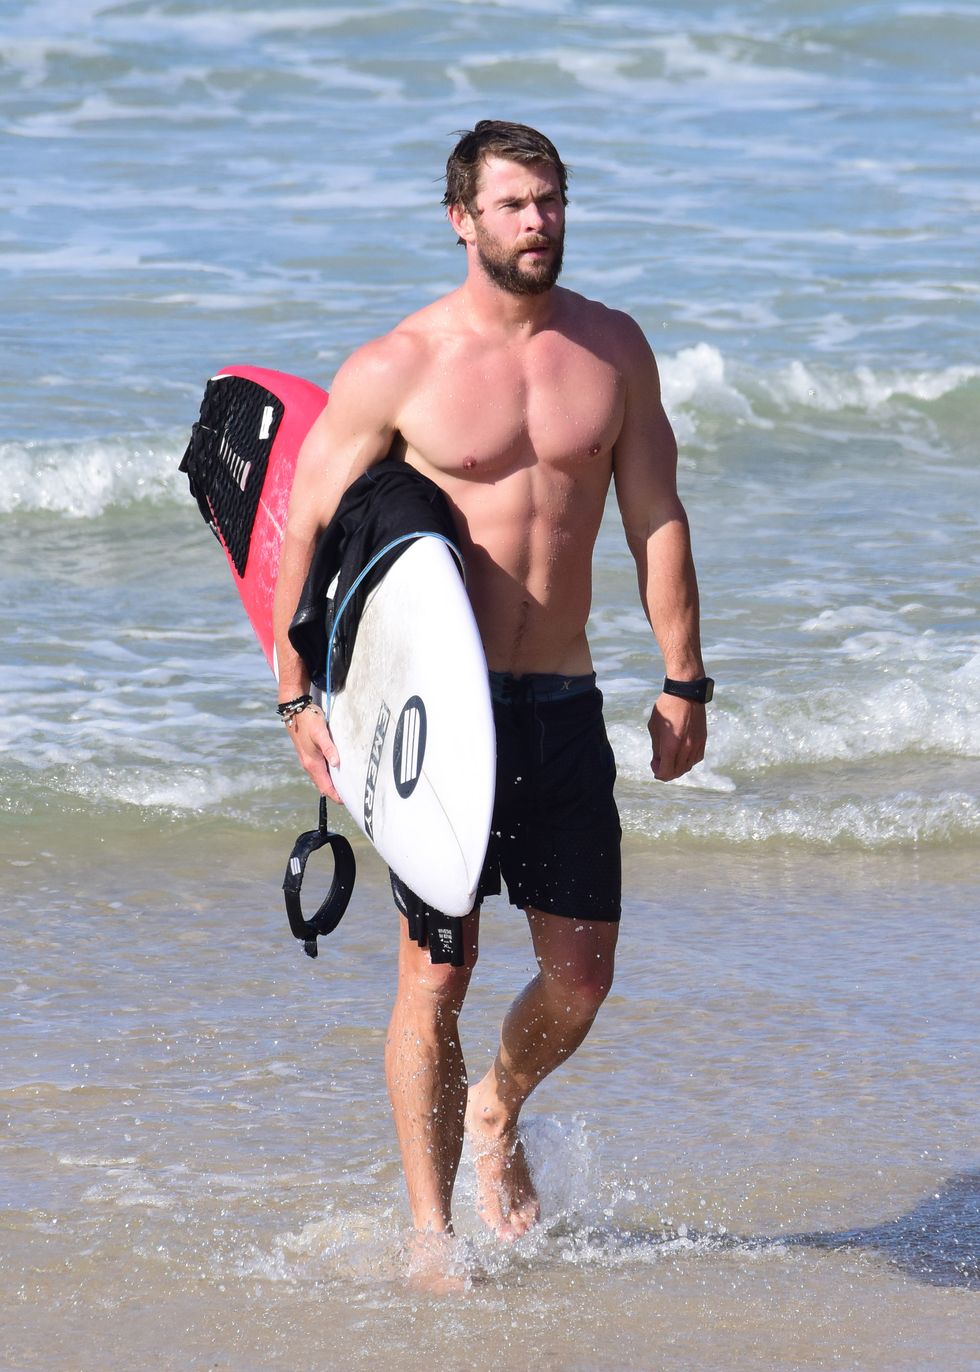 byron bay, nsw   april 28  chris hemsworth is seen surfing and relaxing at the beach on april 28, 2016 in byron bay, australia  photo by matrixgc images